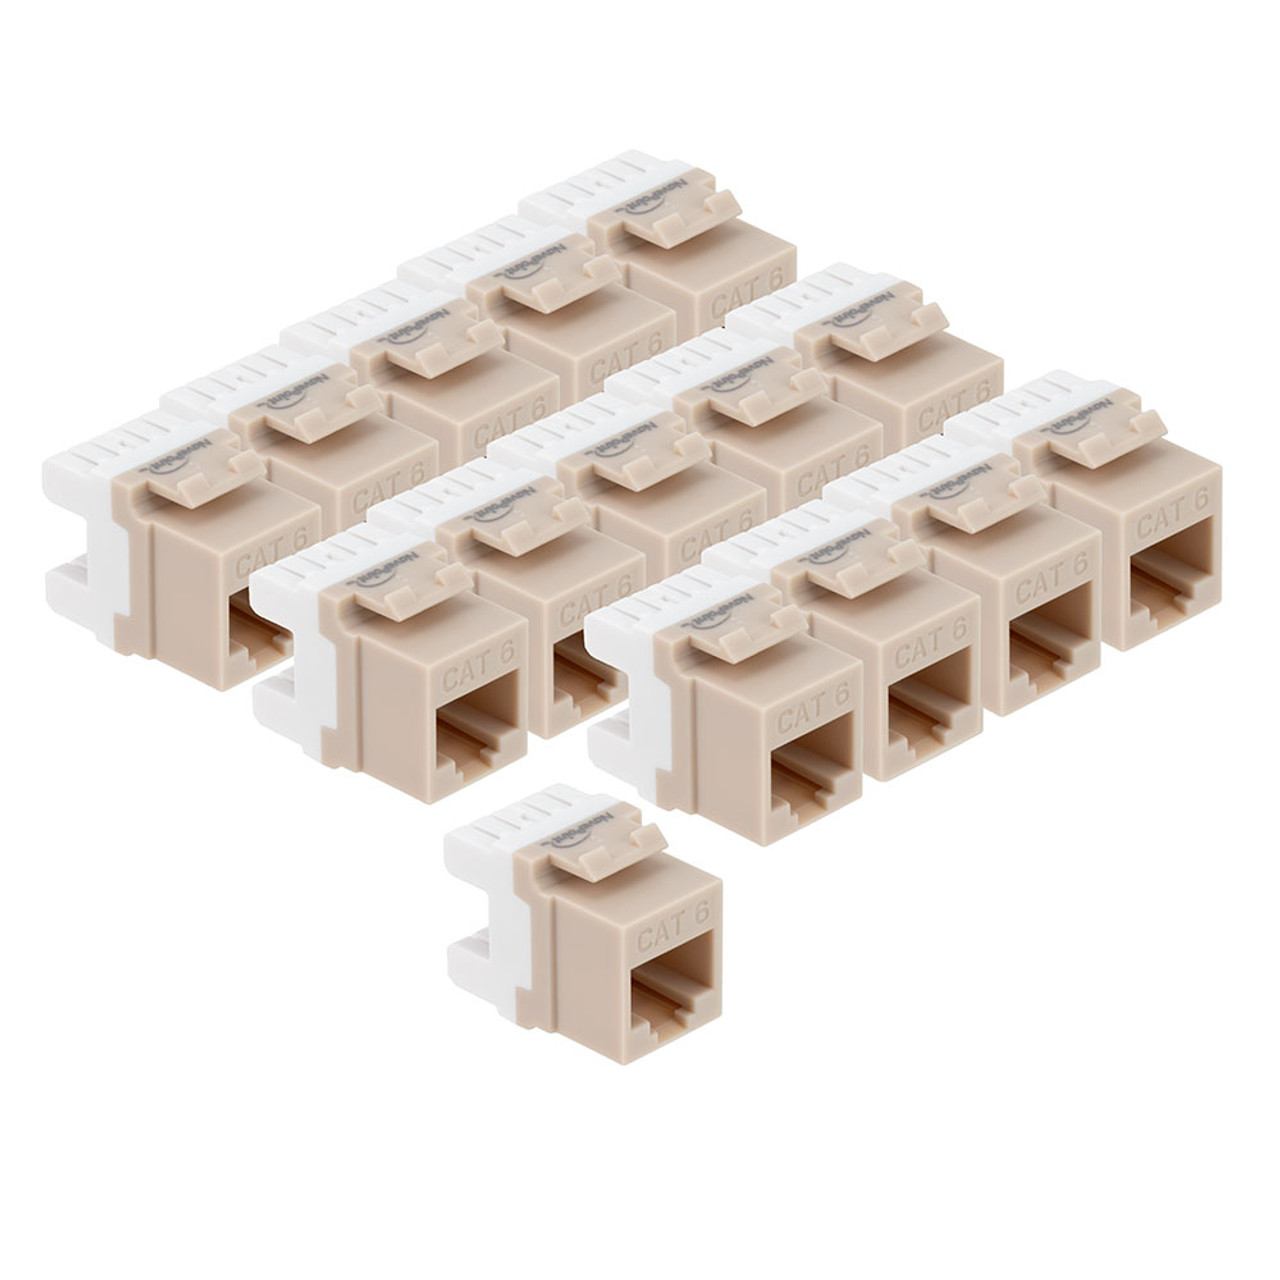 CAT6 Keystone Jack, Snap-In, 180-Degree Termination, Thermoplastic , Light Almond, 15-Pack, CE Compliant